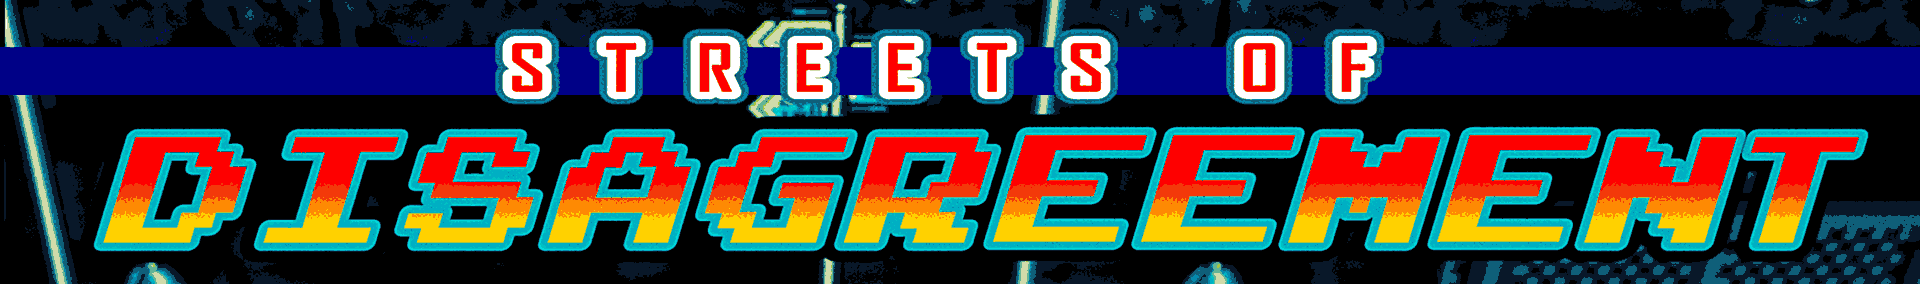 STREETS OF DISAGREEMENT (streets of rage remake)